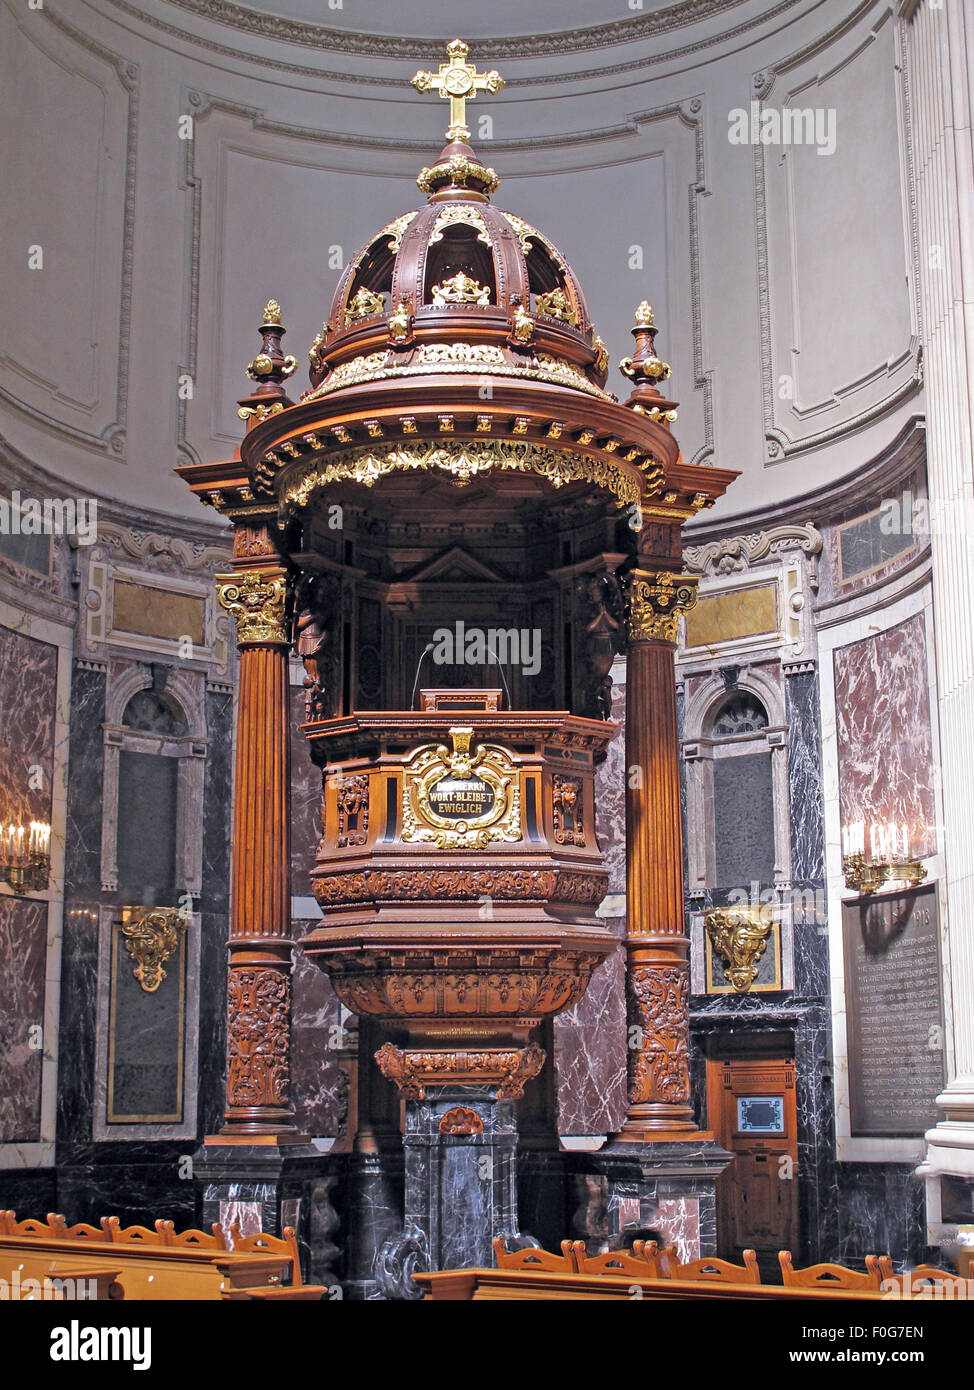 Pulpit in the Berlin Cathedral Pulpit c1905, Germany; Wood and gold design with crucifix. Stock Photo